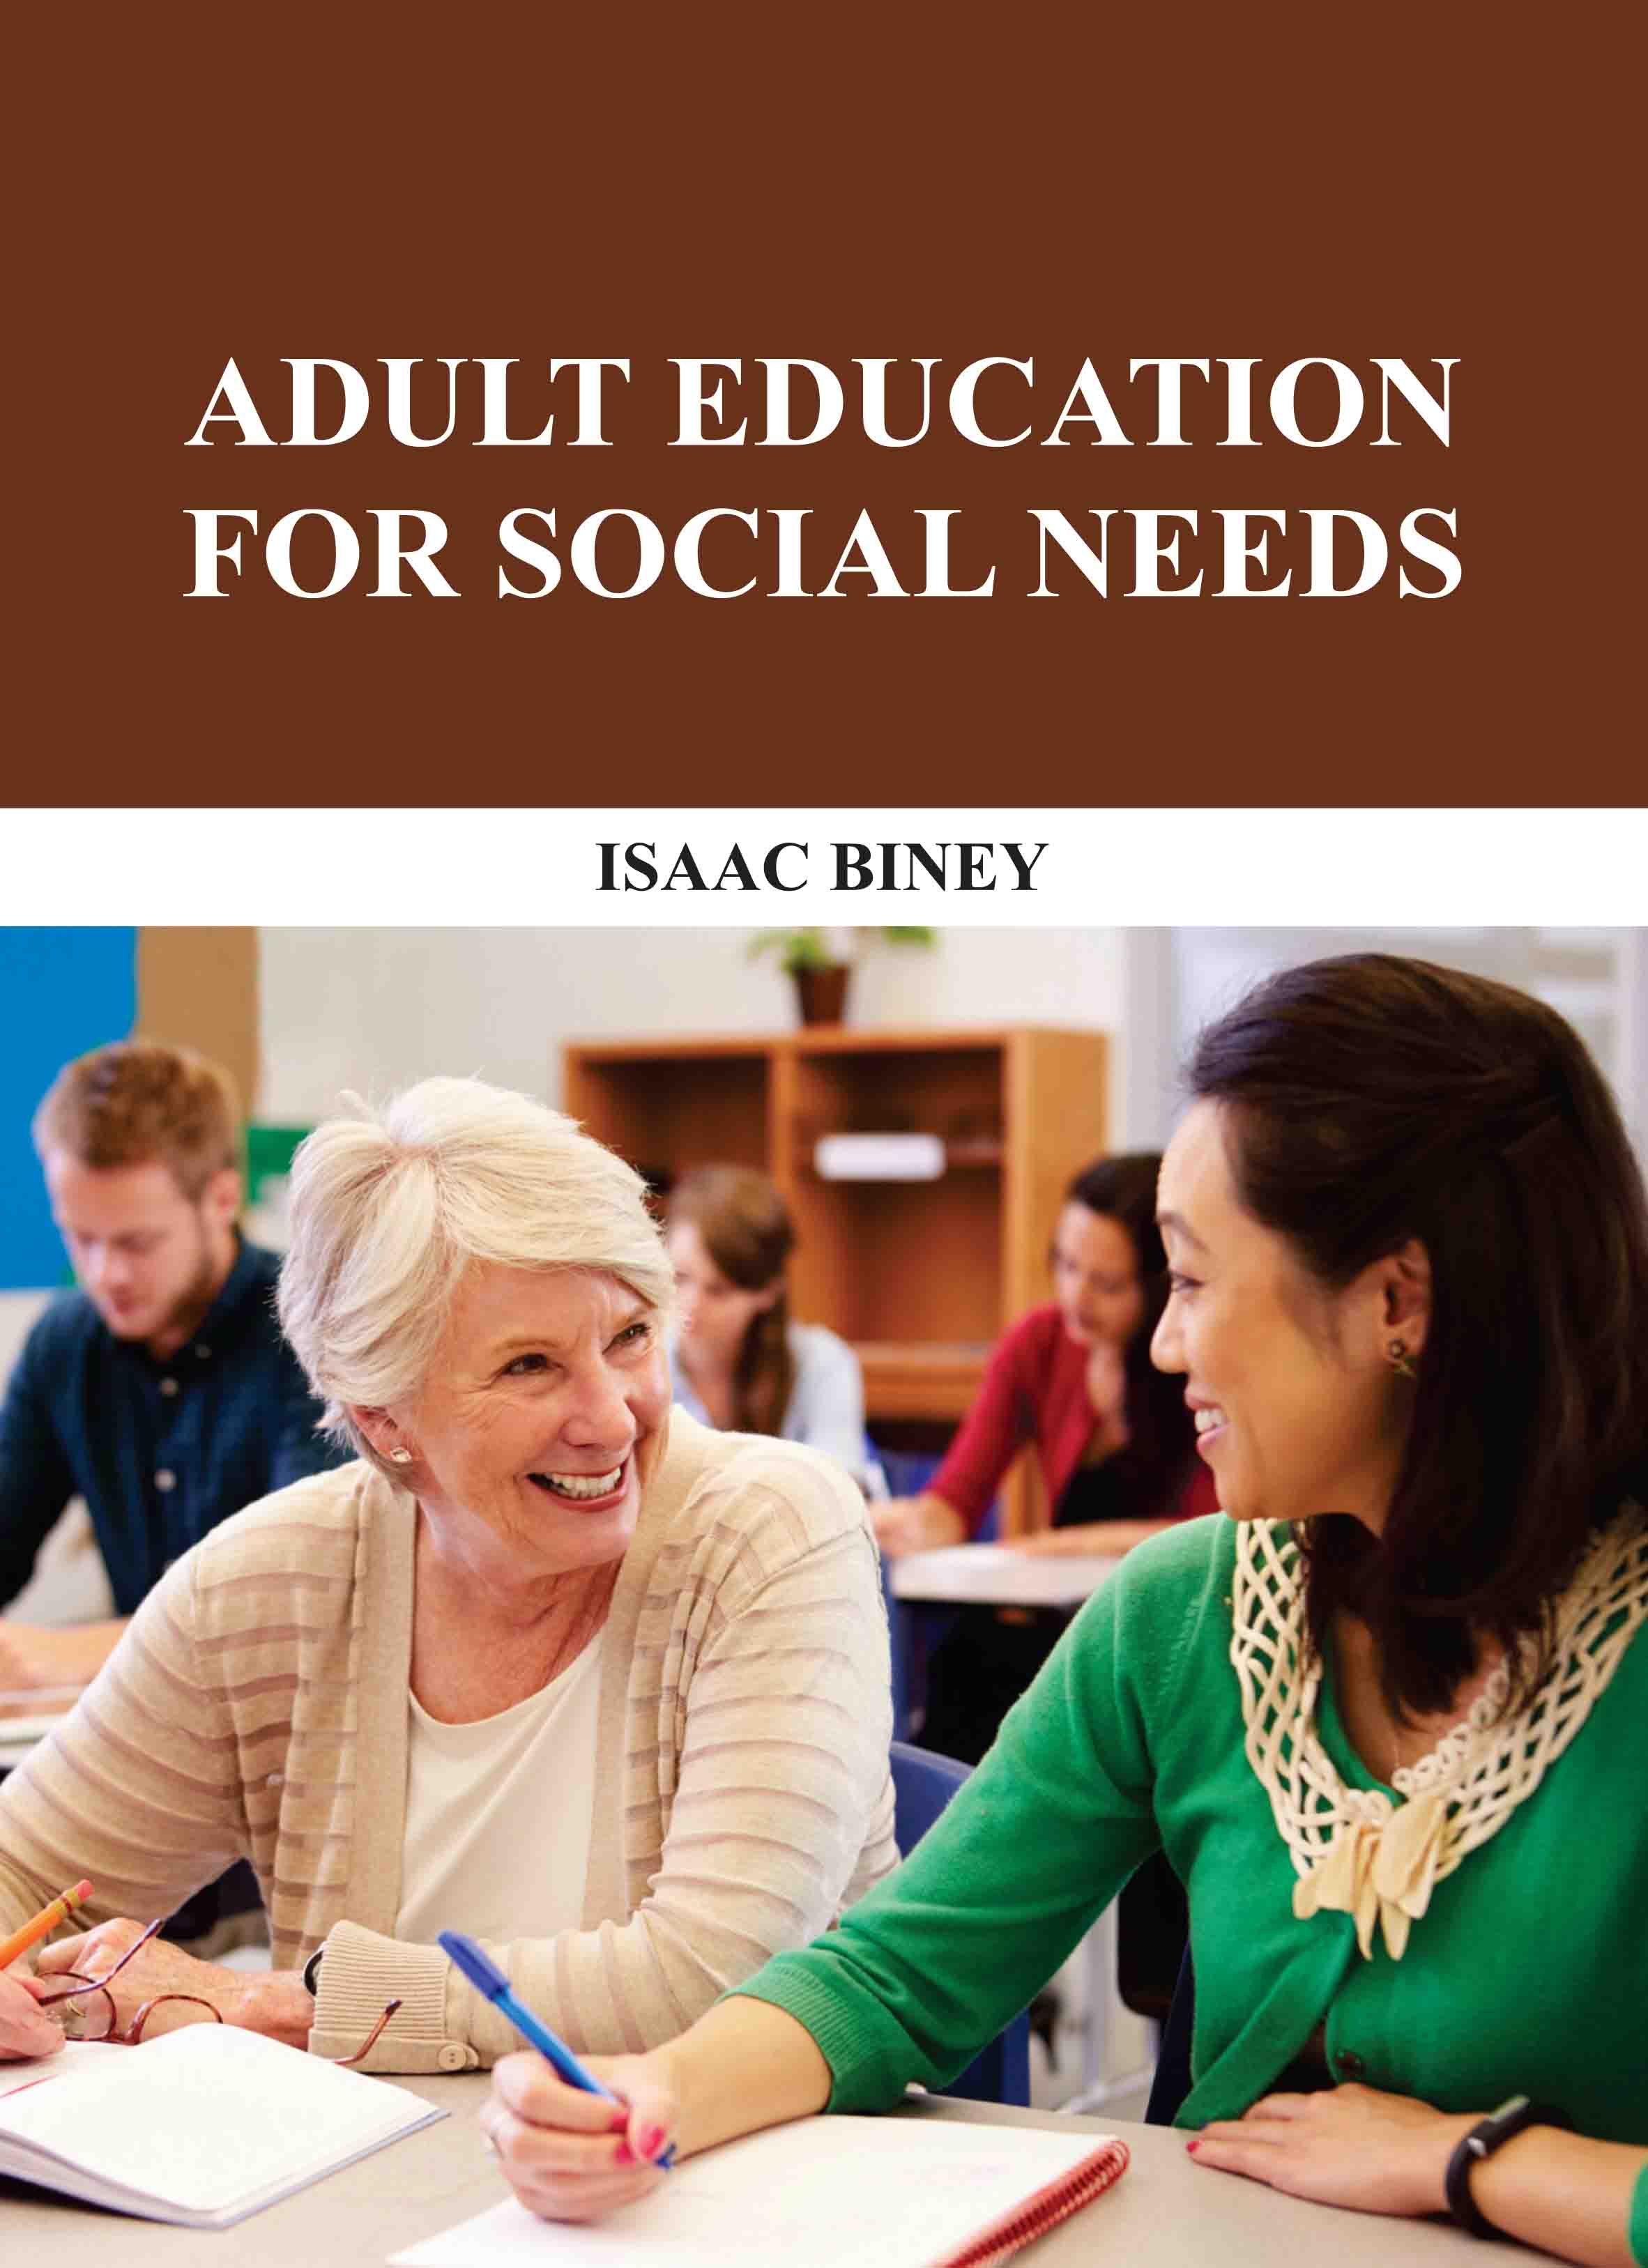 Adult Education for Social Needs